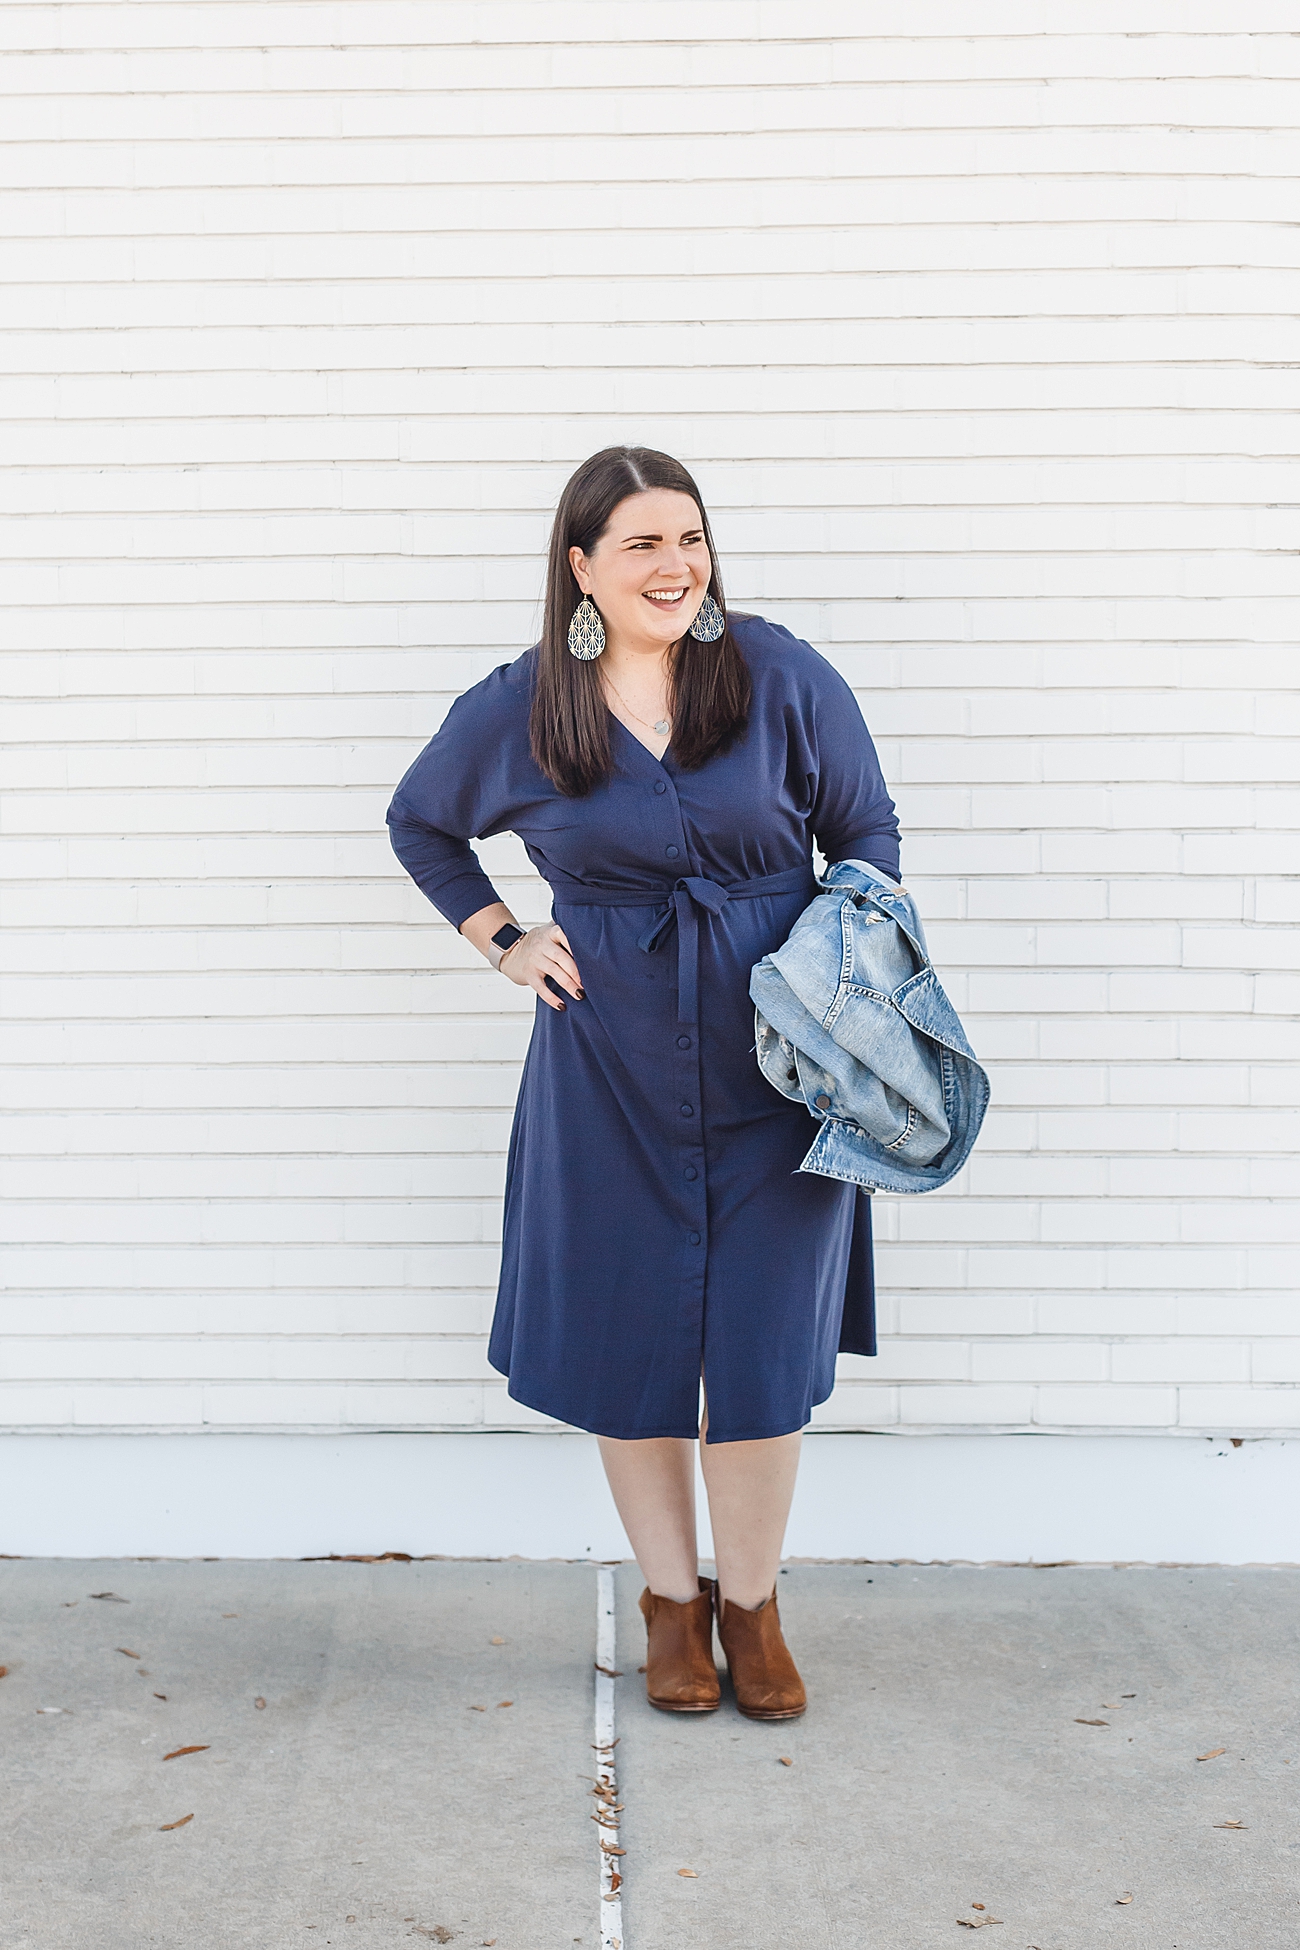 The Elegantees "Molly" Dress is Here! | Beautiful, versatile, ethically made dress (33)